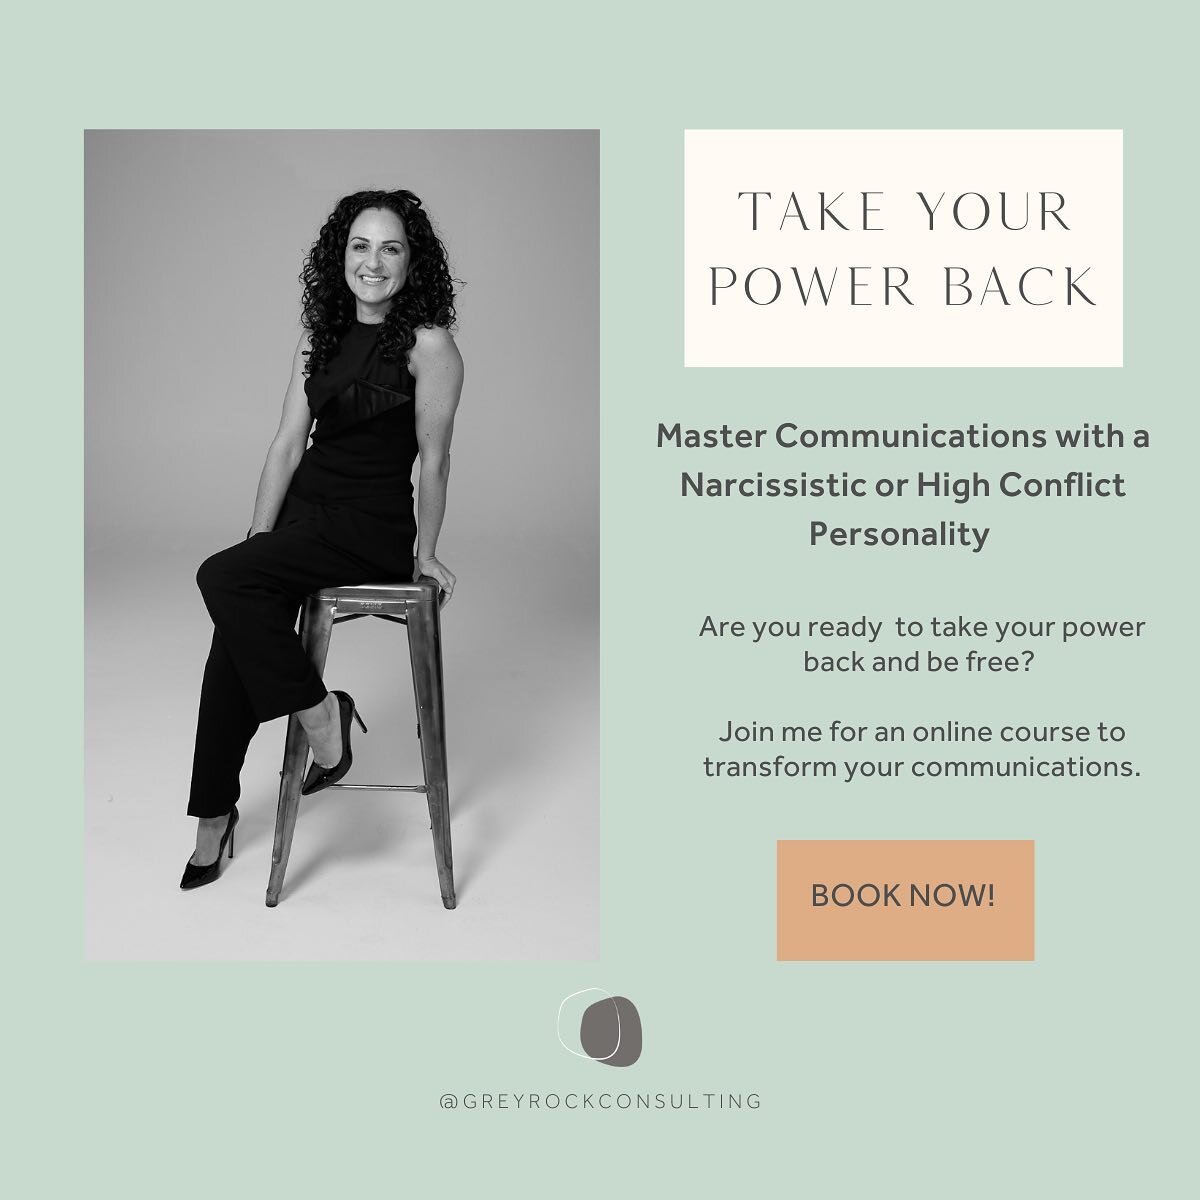 TAKE YOUR POWER BACK!

Are you receiving communications from a narcissistic or high conflict personality that don&rsquo;t make any sense? Do you feel that no matter what you do nothing seems to work? Does it feel like things will never change? 

I ge